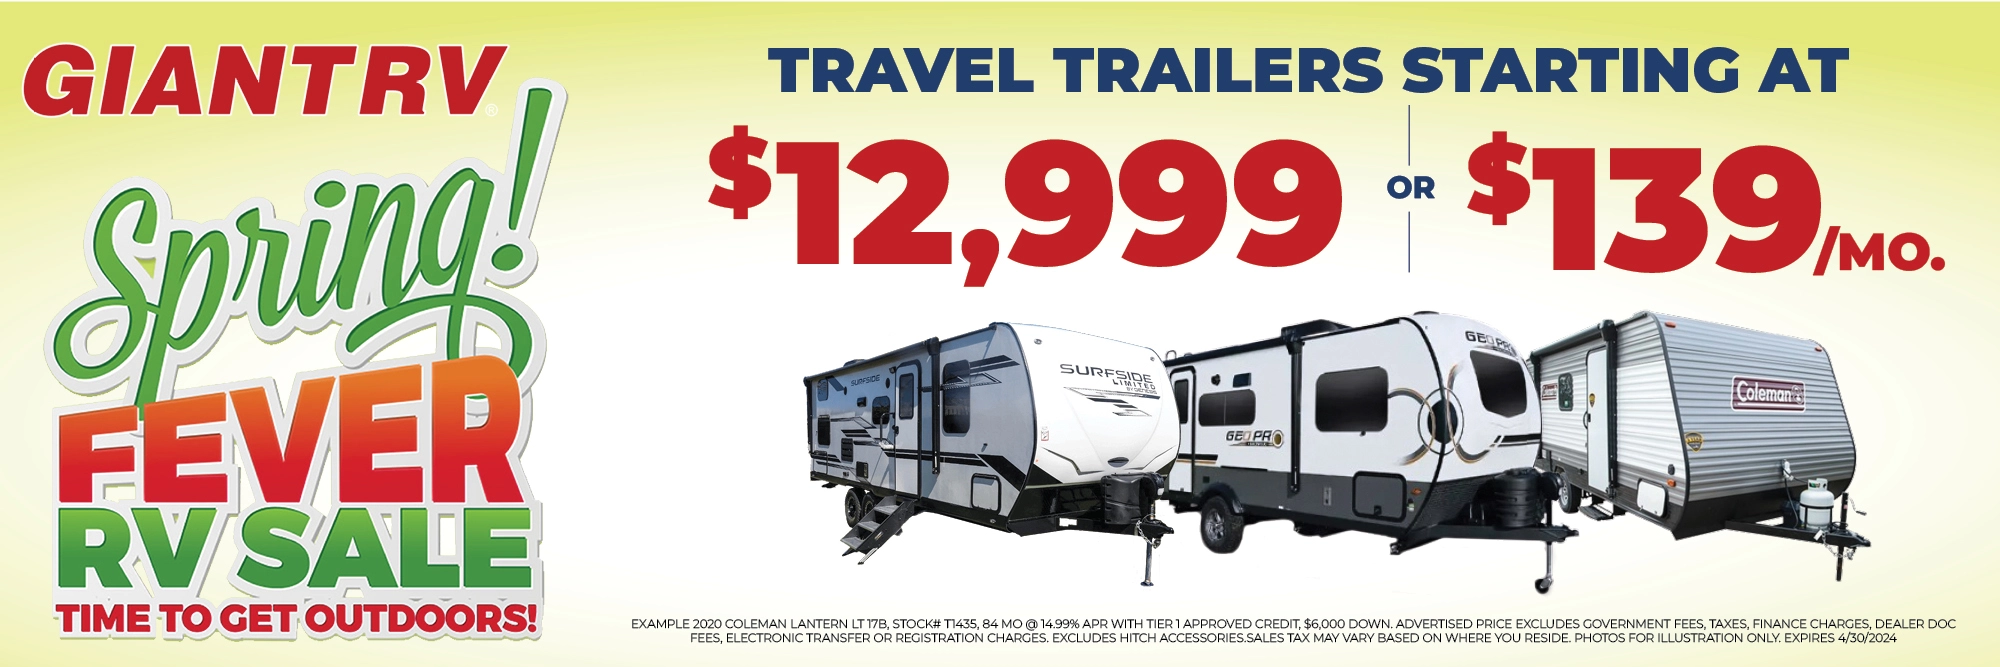 Giant RV Spring Fever RV Sale - Travel Trailers Starting at $12,999 or $139/Month